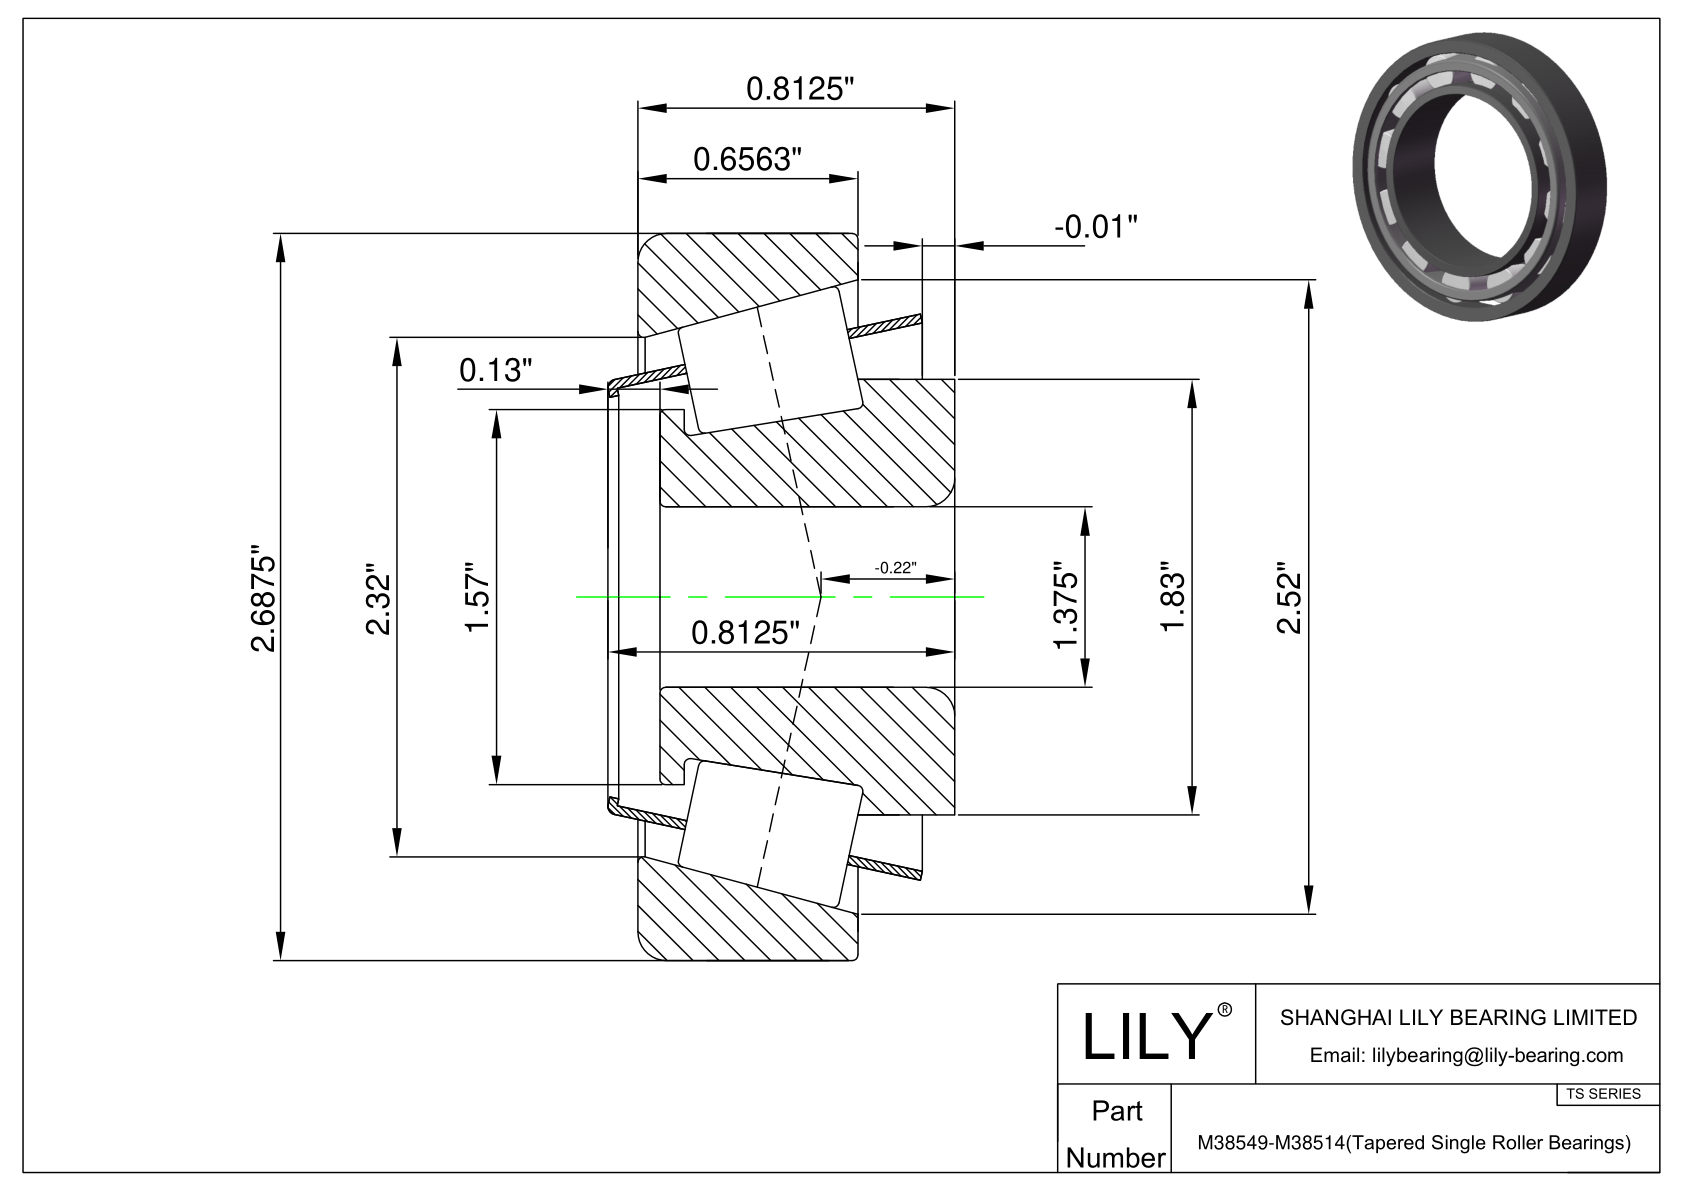 M38549-M38514 TS (Tapered Single Roller Bearings) (Imperial) cad drawing